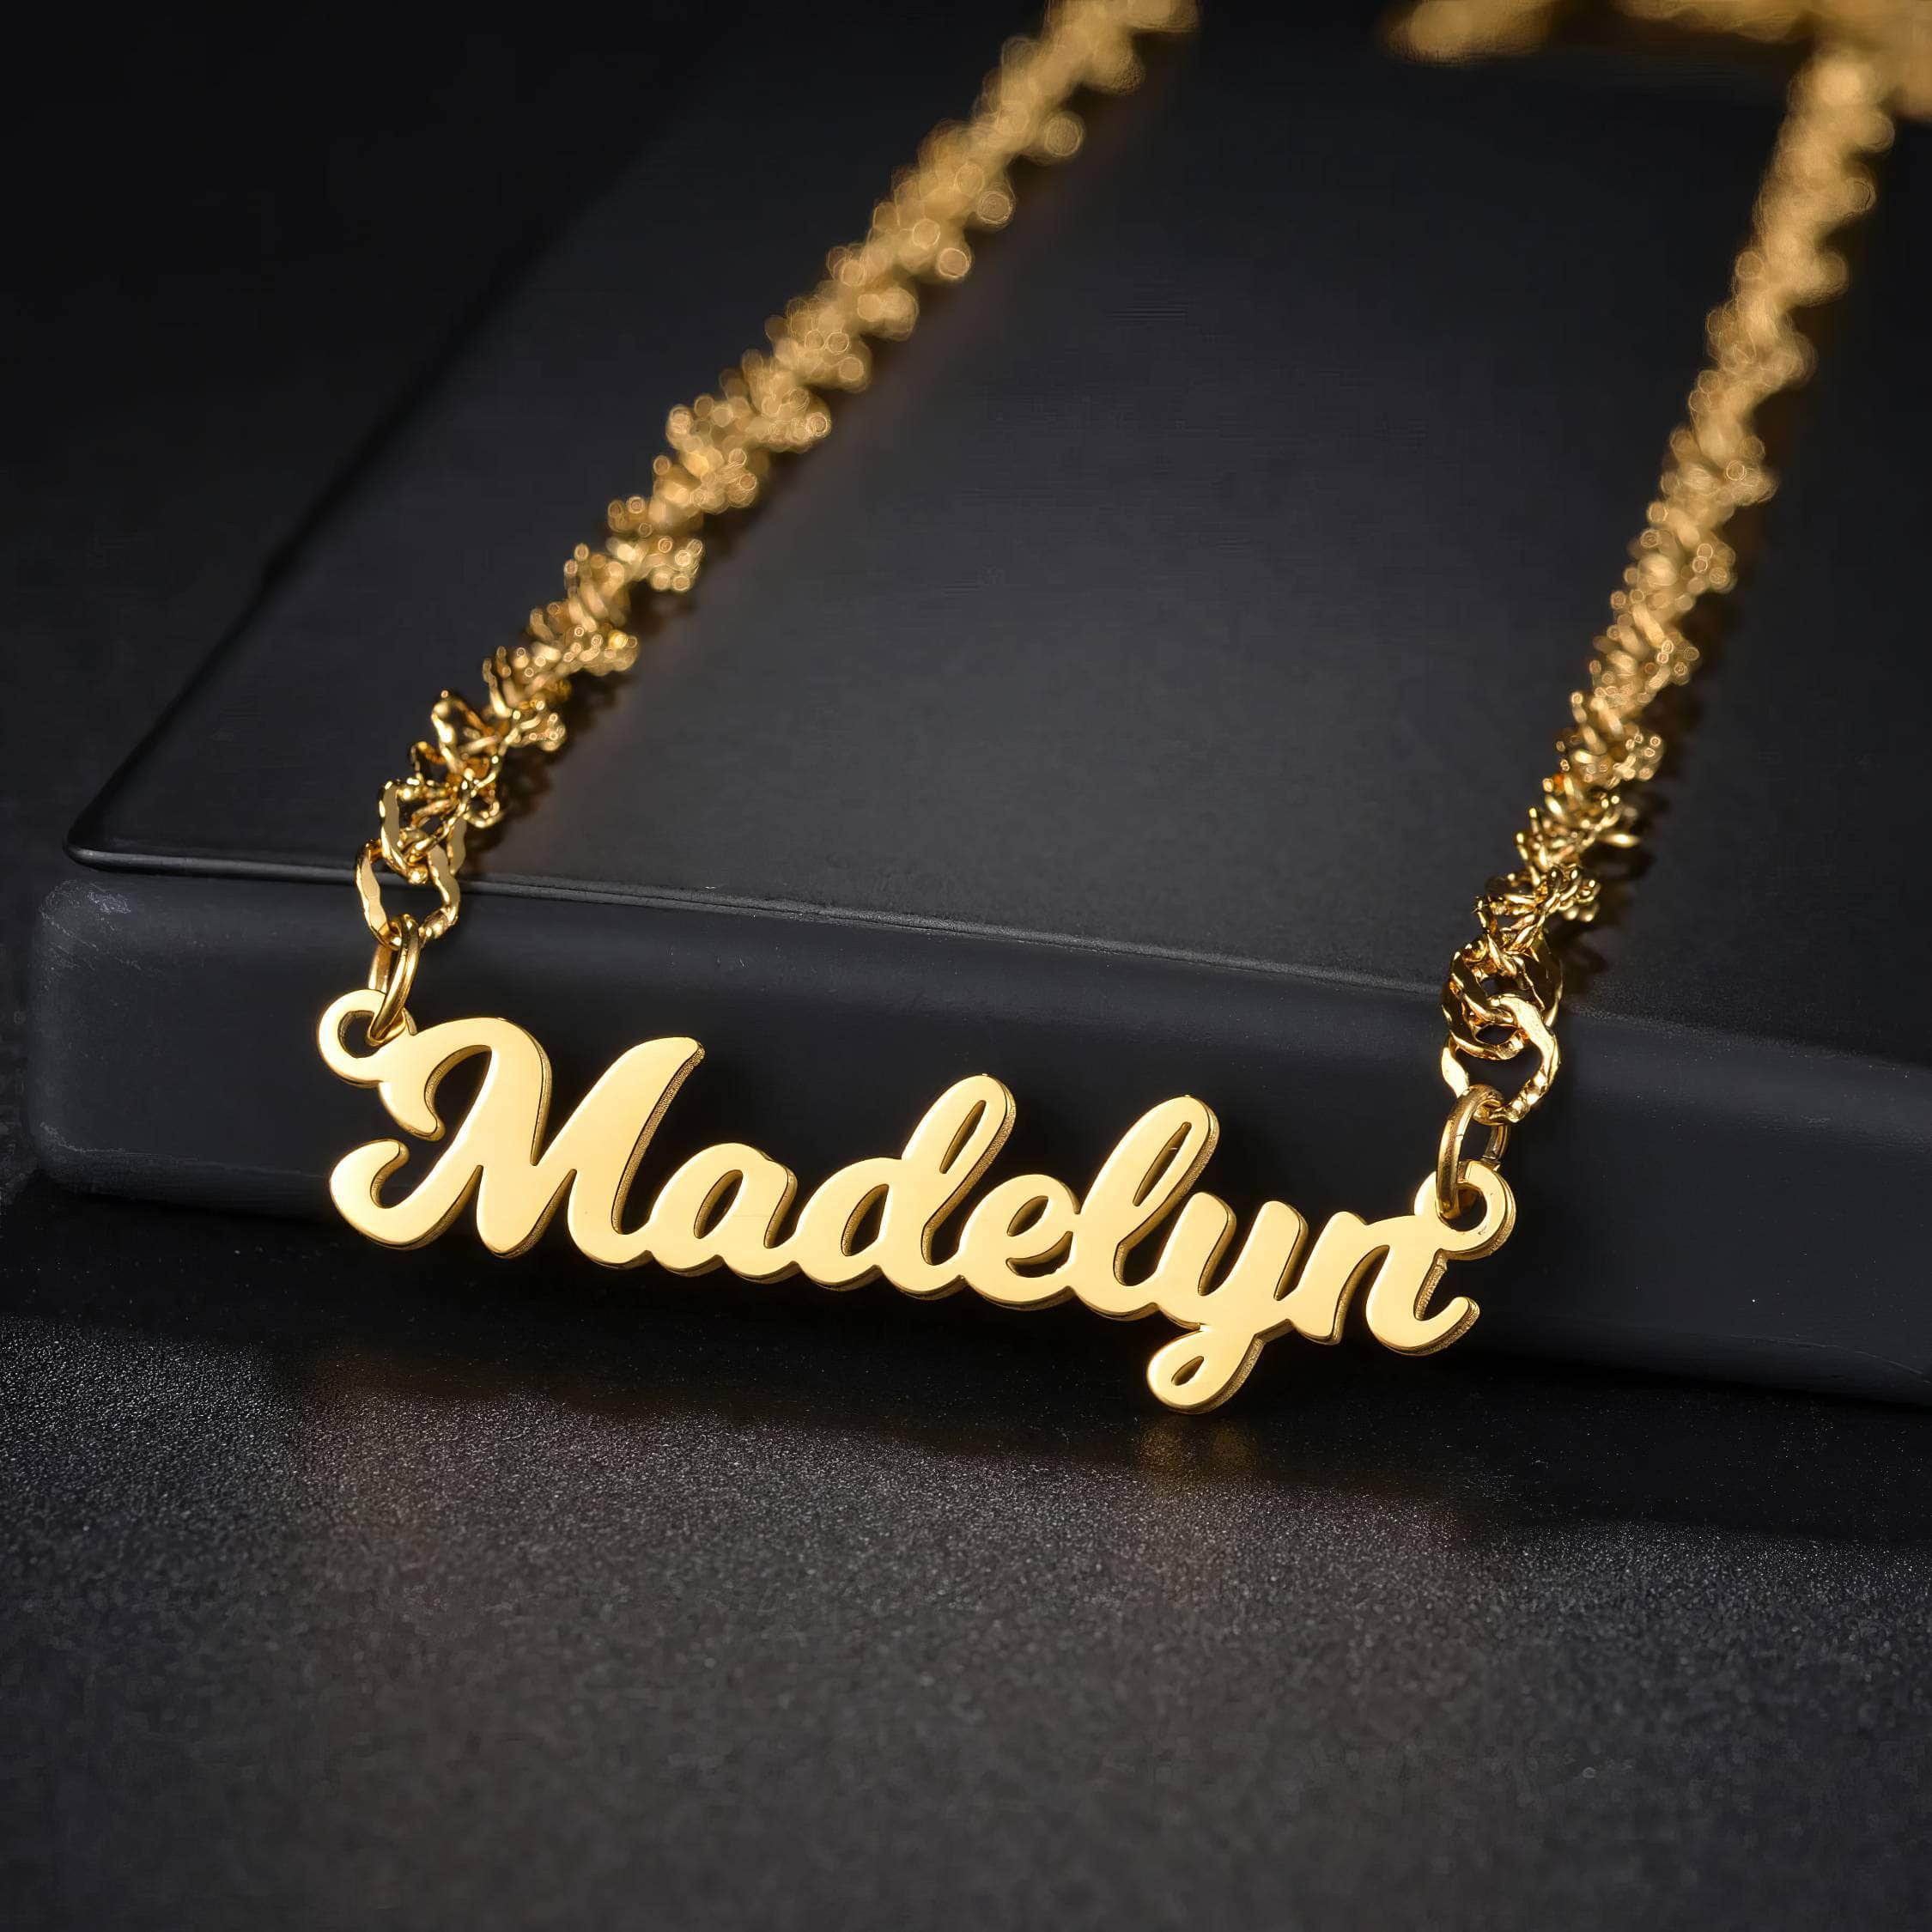 Personalized Custom Name Necklace for Women - Stainless Steel Wave Chain with Letter Nameplate Pendant